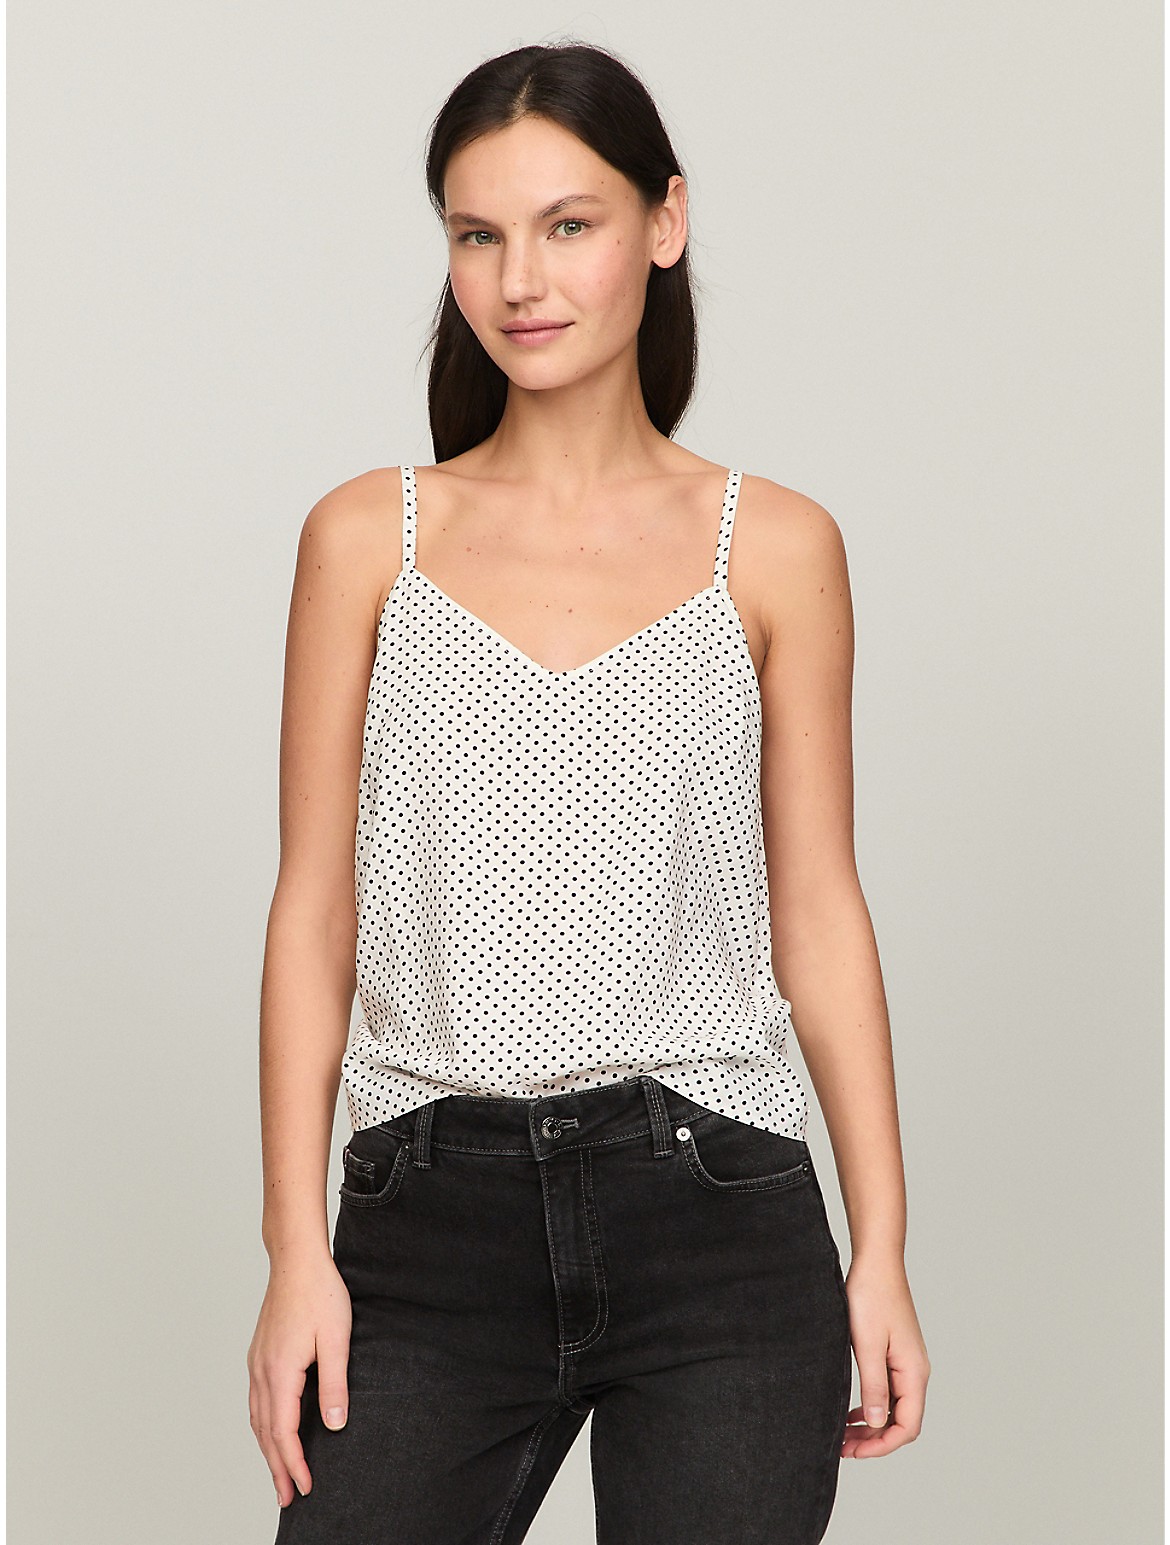 Tommy Hilfiger Women's Relaxed Fit Polka Dot Slip Top